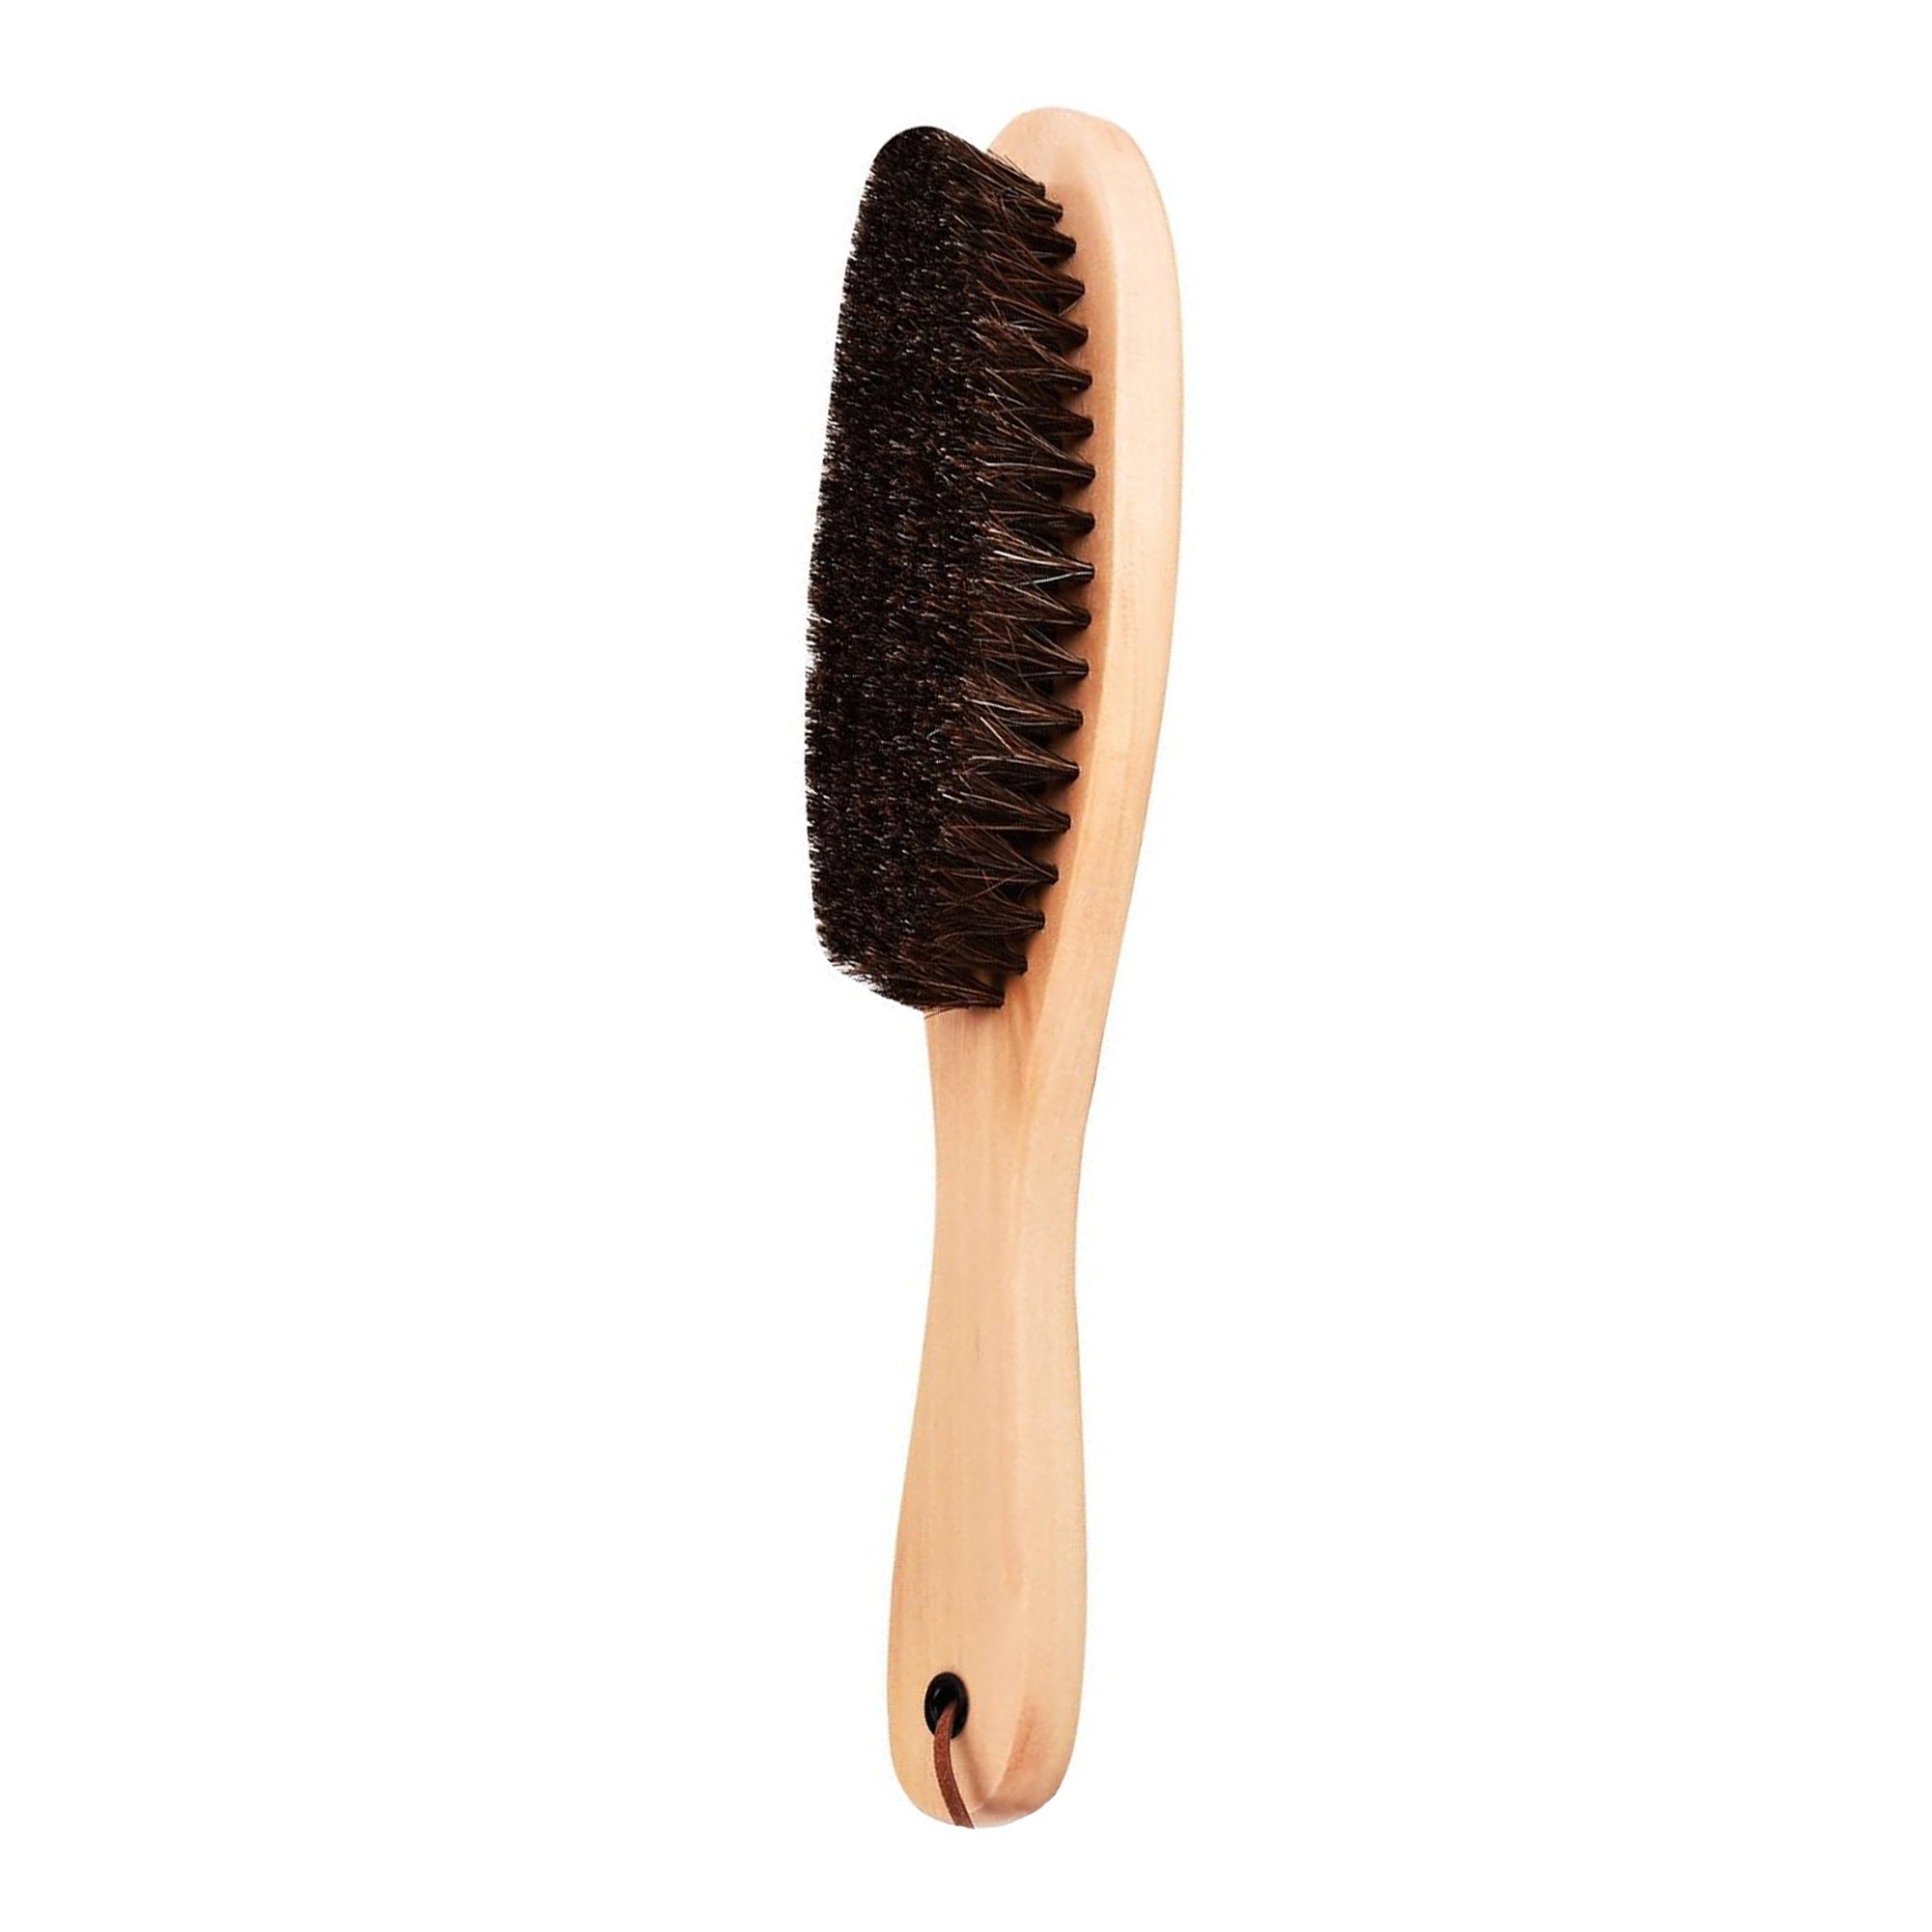 Eson - Fade Brush Long Horse Hair Comfort During Use 23x5cm (Natural)